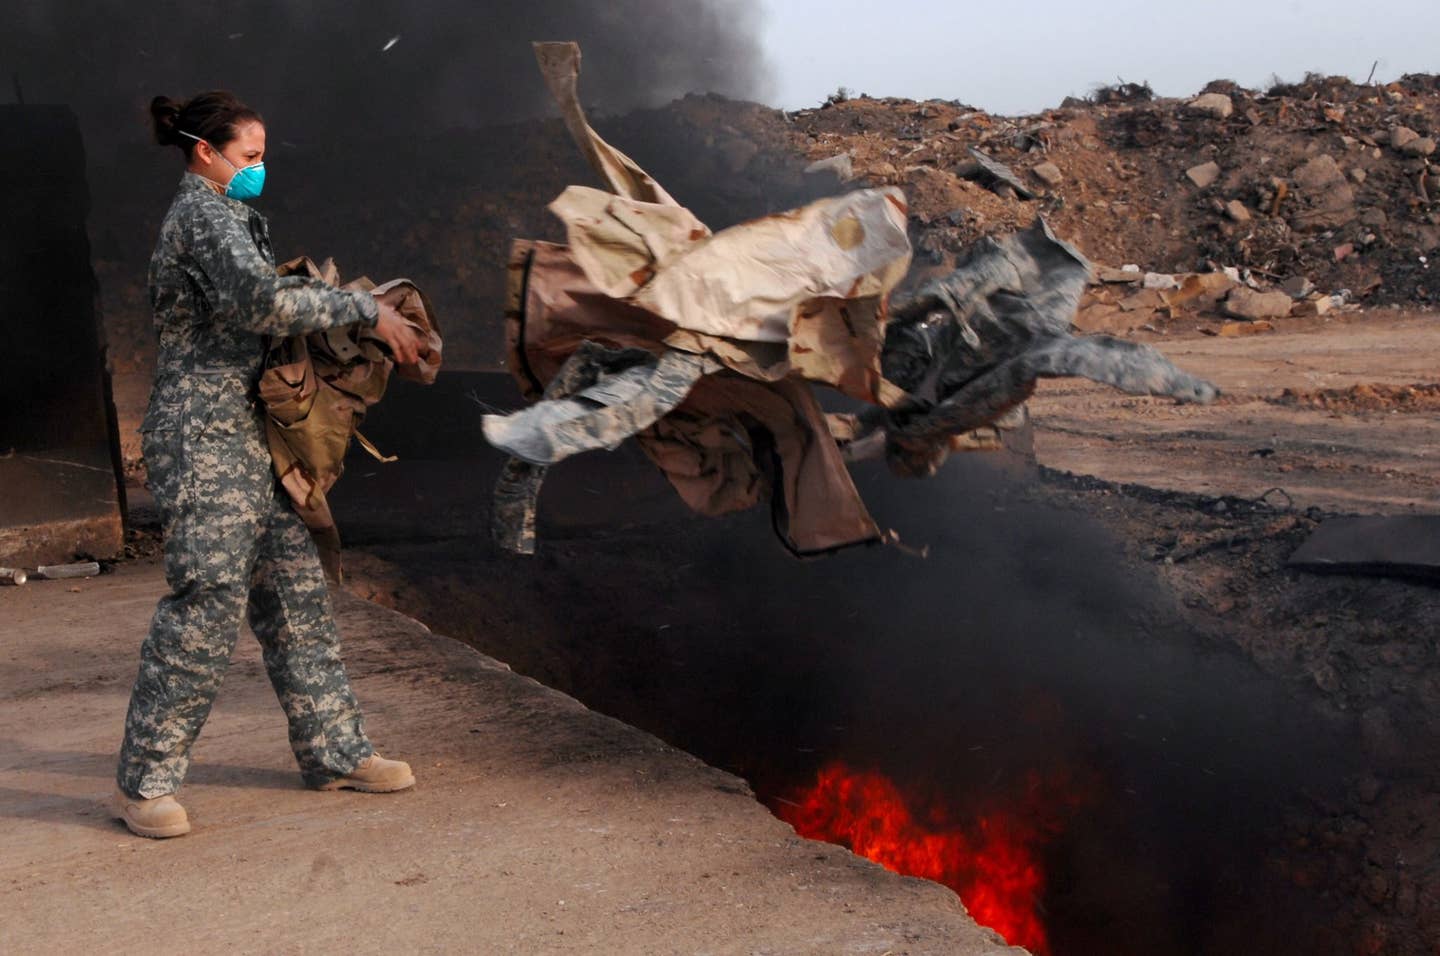 Senior Airman Frances Gavalis, 332nd Expeditionary Logistics Readiness Squadron equipment manager, tosses unserviceable uniform items into a burn pit, March 10, 2008. US Air Force photo by Sr. Airman Julianne Showalter.